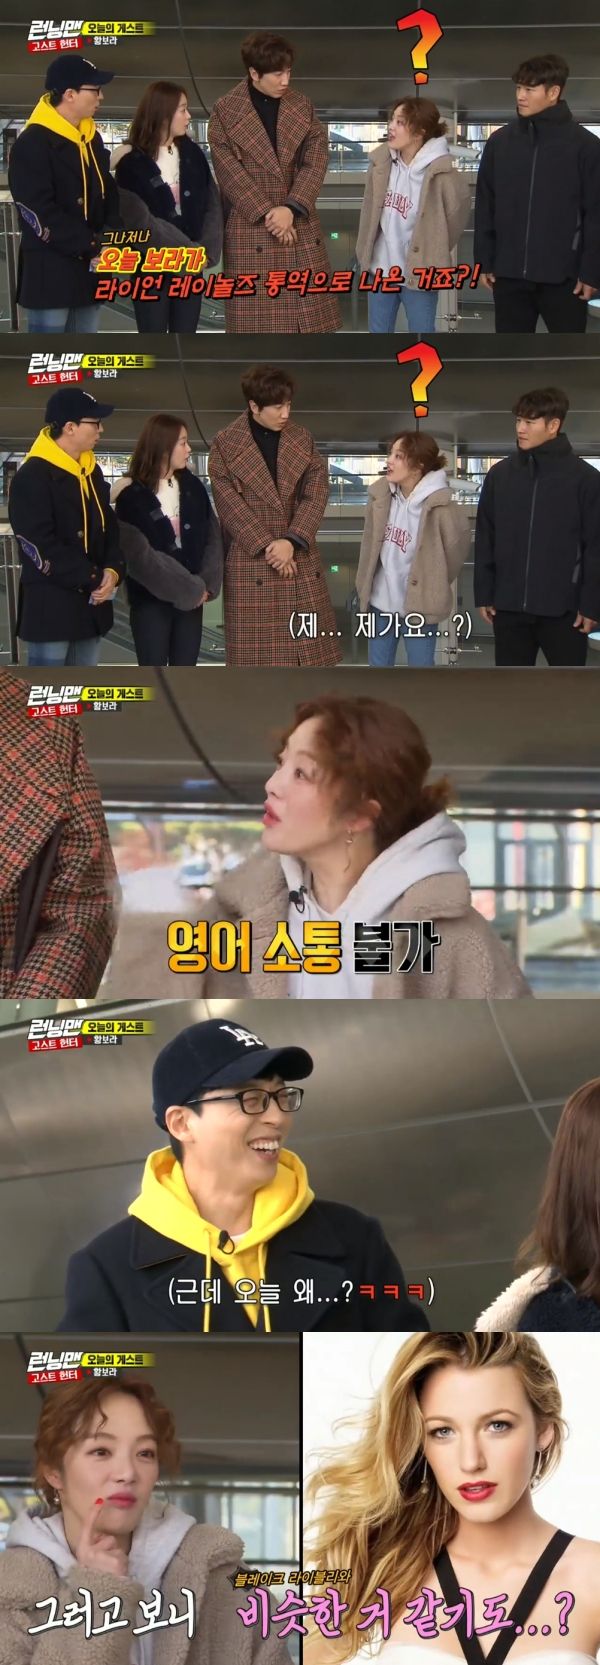 Hwang Bo Ra has become a Blayk Lively Similiar.On SBS Running Man broadcast on the 22nd, guest Hwang Bo Ra became Lion Laynolds wife Blayk Lively Similiar.On the day of the show, Hwang Bo Ra appeared as a guest.Members who waited for Lion Laynolds asked Did you come out as an interpreter over the appearance of Hwang Bo Ra.I can not do any English language, said Hwang Bo Ra. I was very angry to come out of Paris Hilton.English language I can not do that, why did you come out? Yoo Jae-seok, who watched, asked, Why did you insult me? And Hwang Bo Ra laughed at the members, saying, I am so upset.Still, Hwang Bo Ra added of Lion Laynolds, who is about to appear, My wife knows, Blayk Lively. The members resembled.There is a connection, he said.